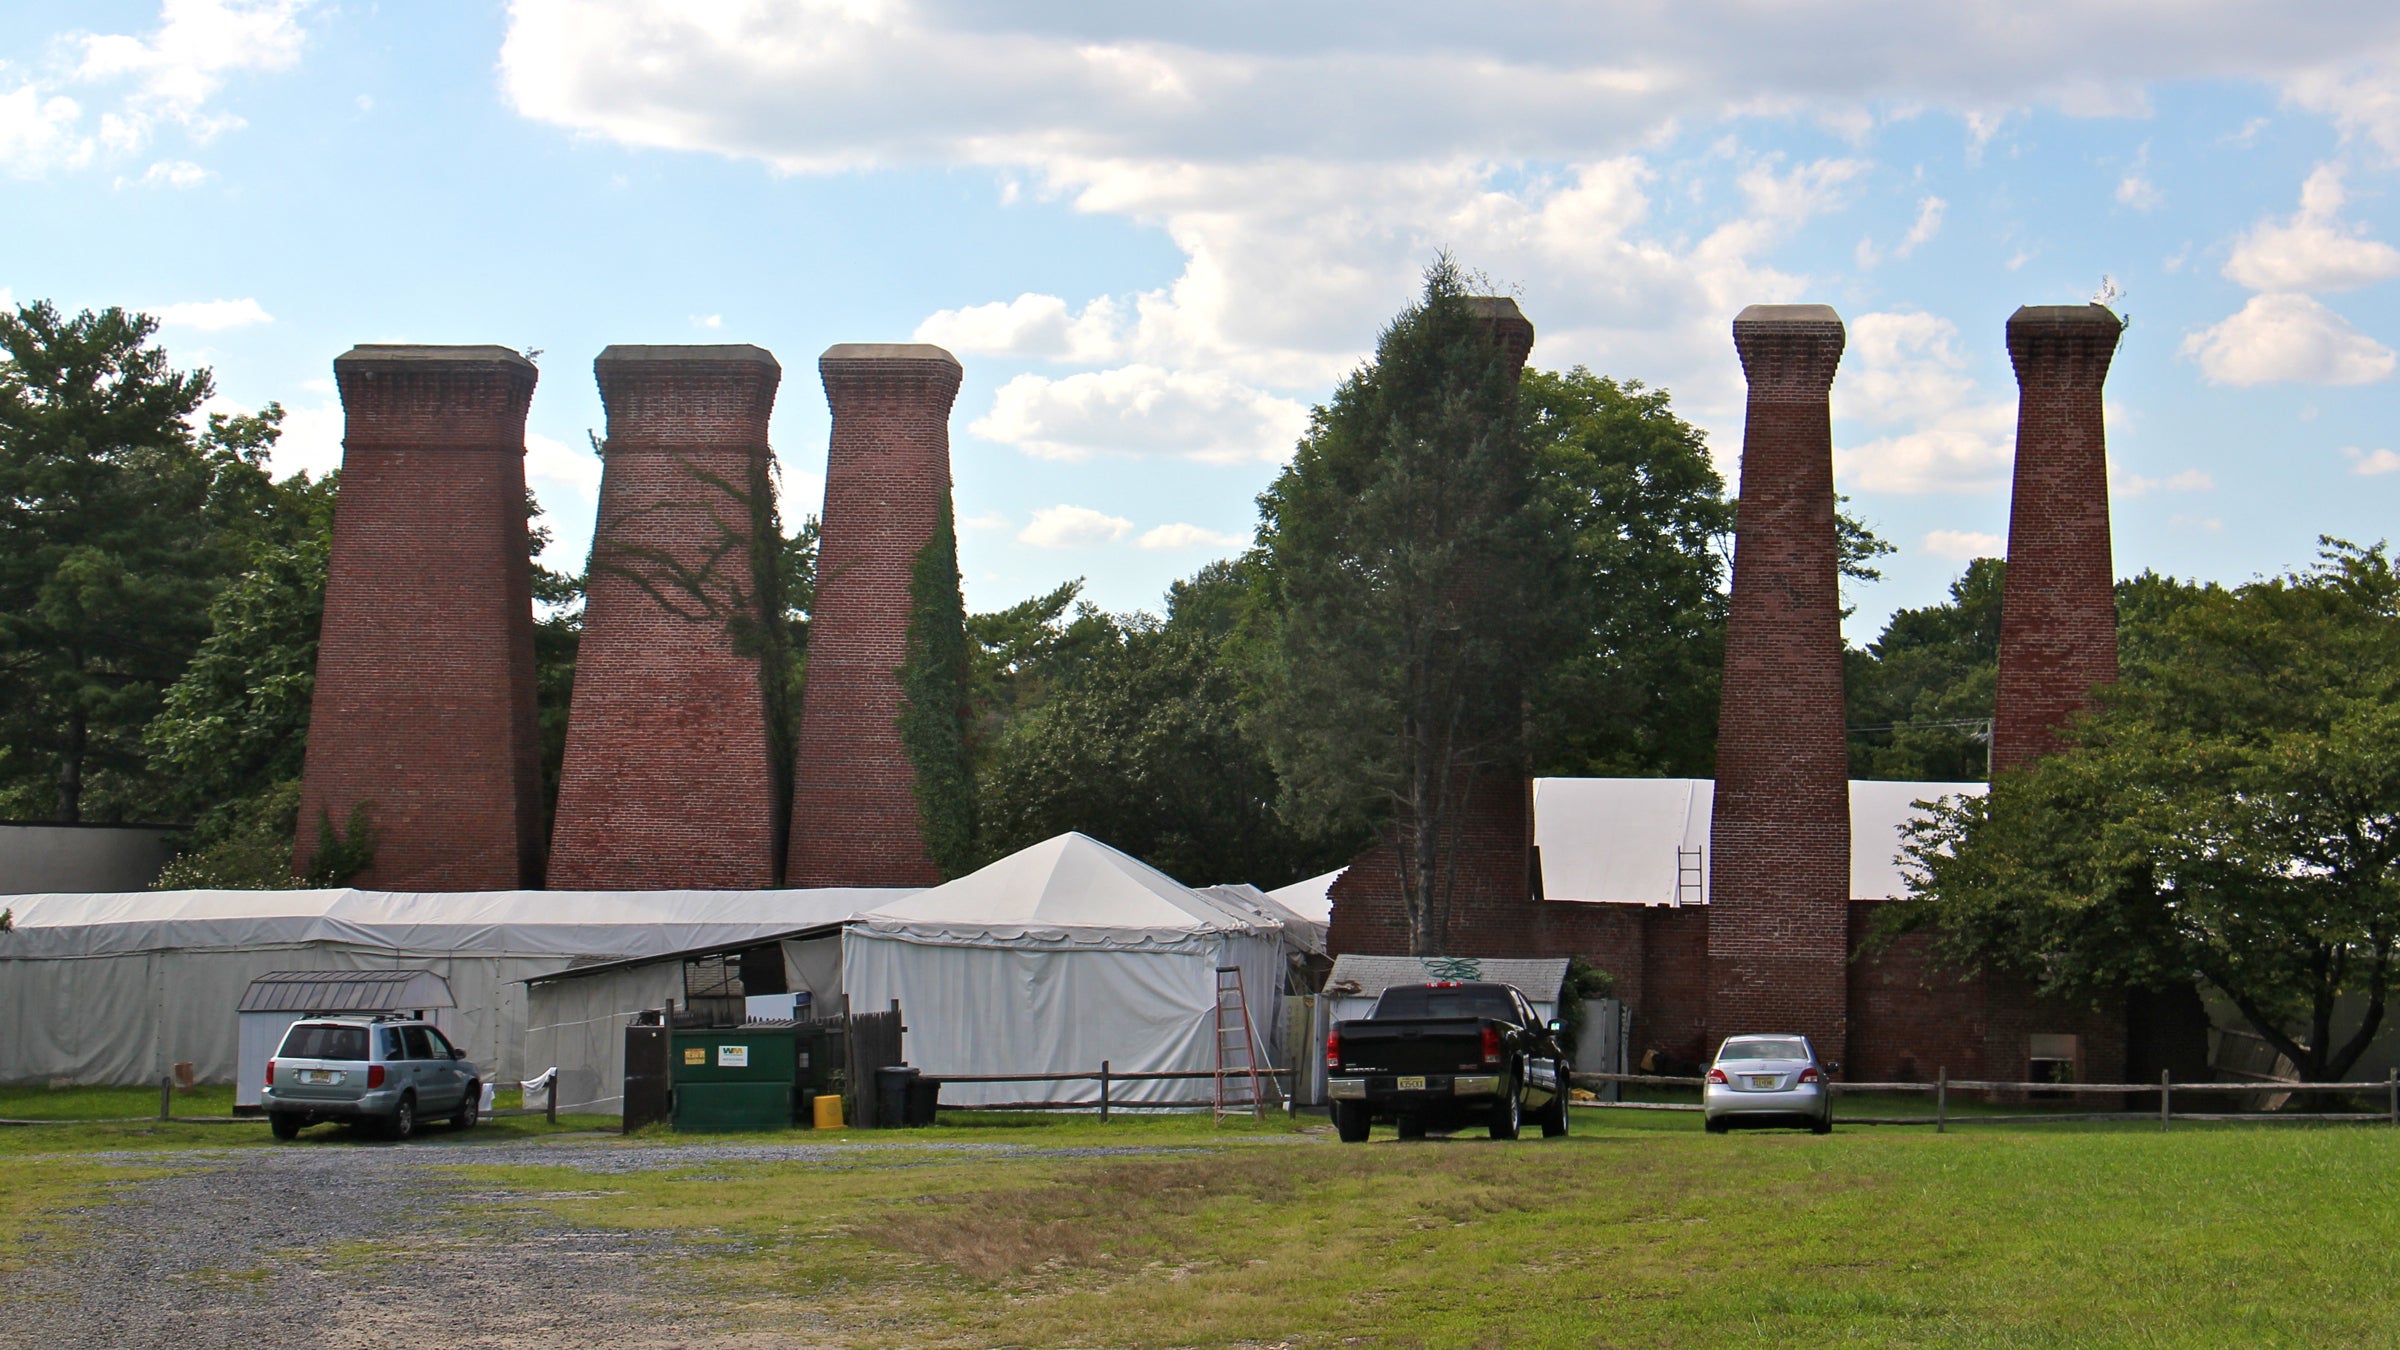  The smokestacks of the former Lucas paint factory loom over the Sherwin-Williams/Hilliards Creek Superfund site in Gibbsboro, New Jersey. Contamination at the site stems from improper paint disposal by Lucas Paint Works and its successor, Sherwin Williams Inc. (Emma Lee/WHYY) 